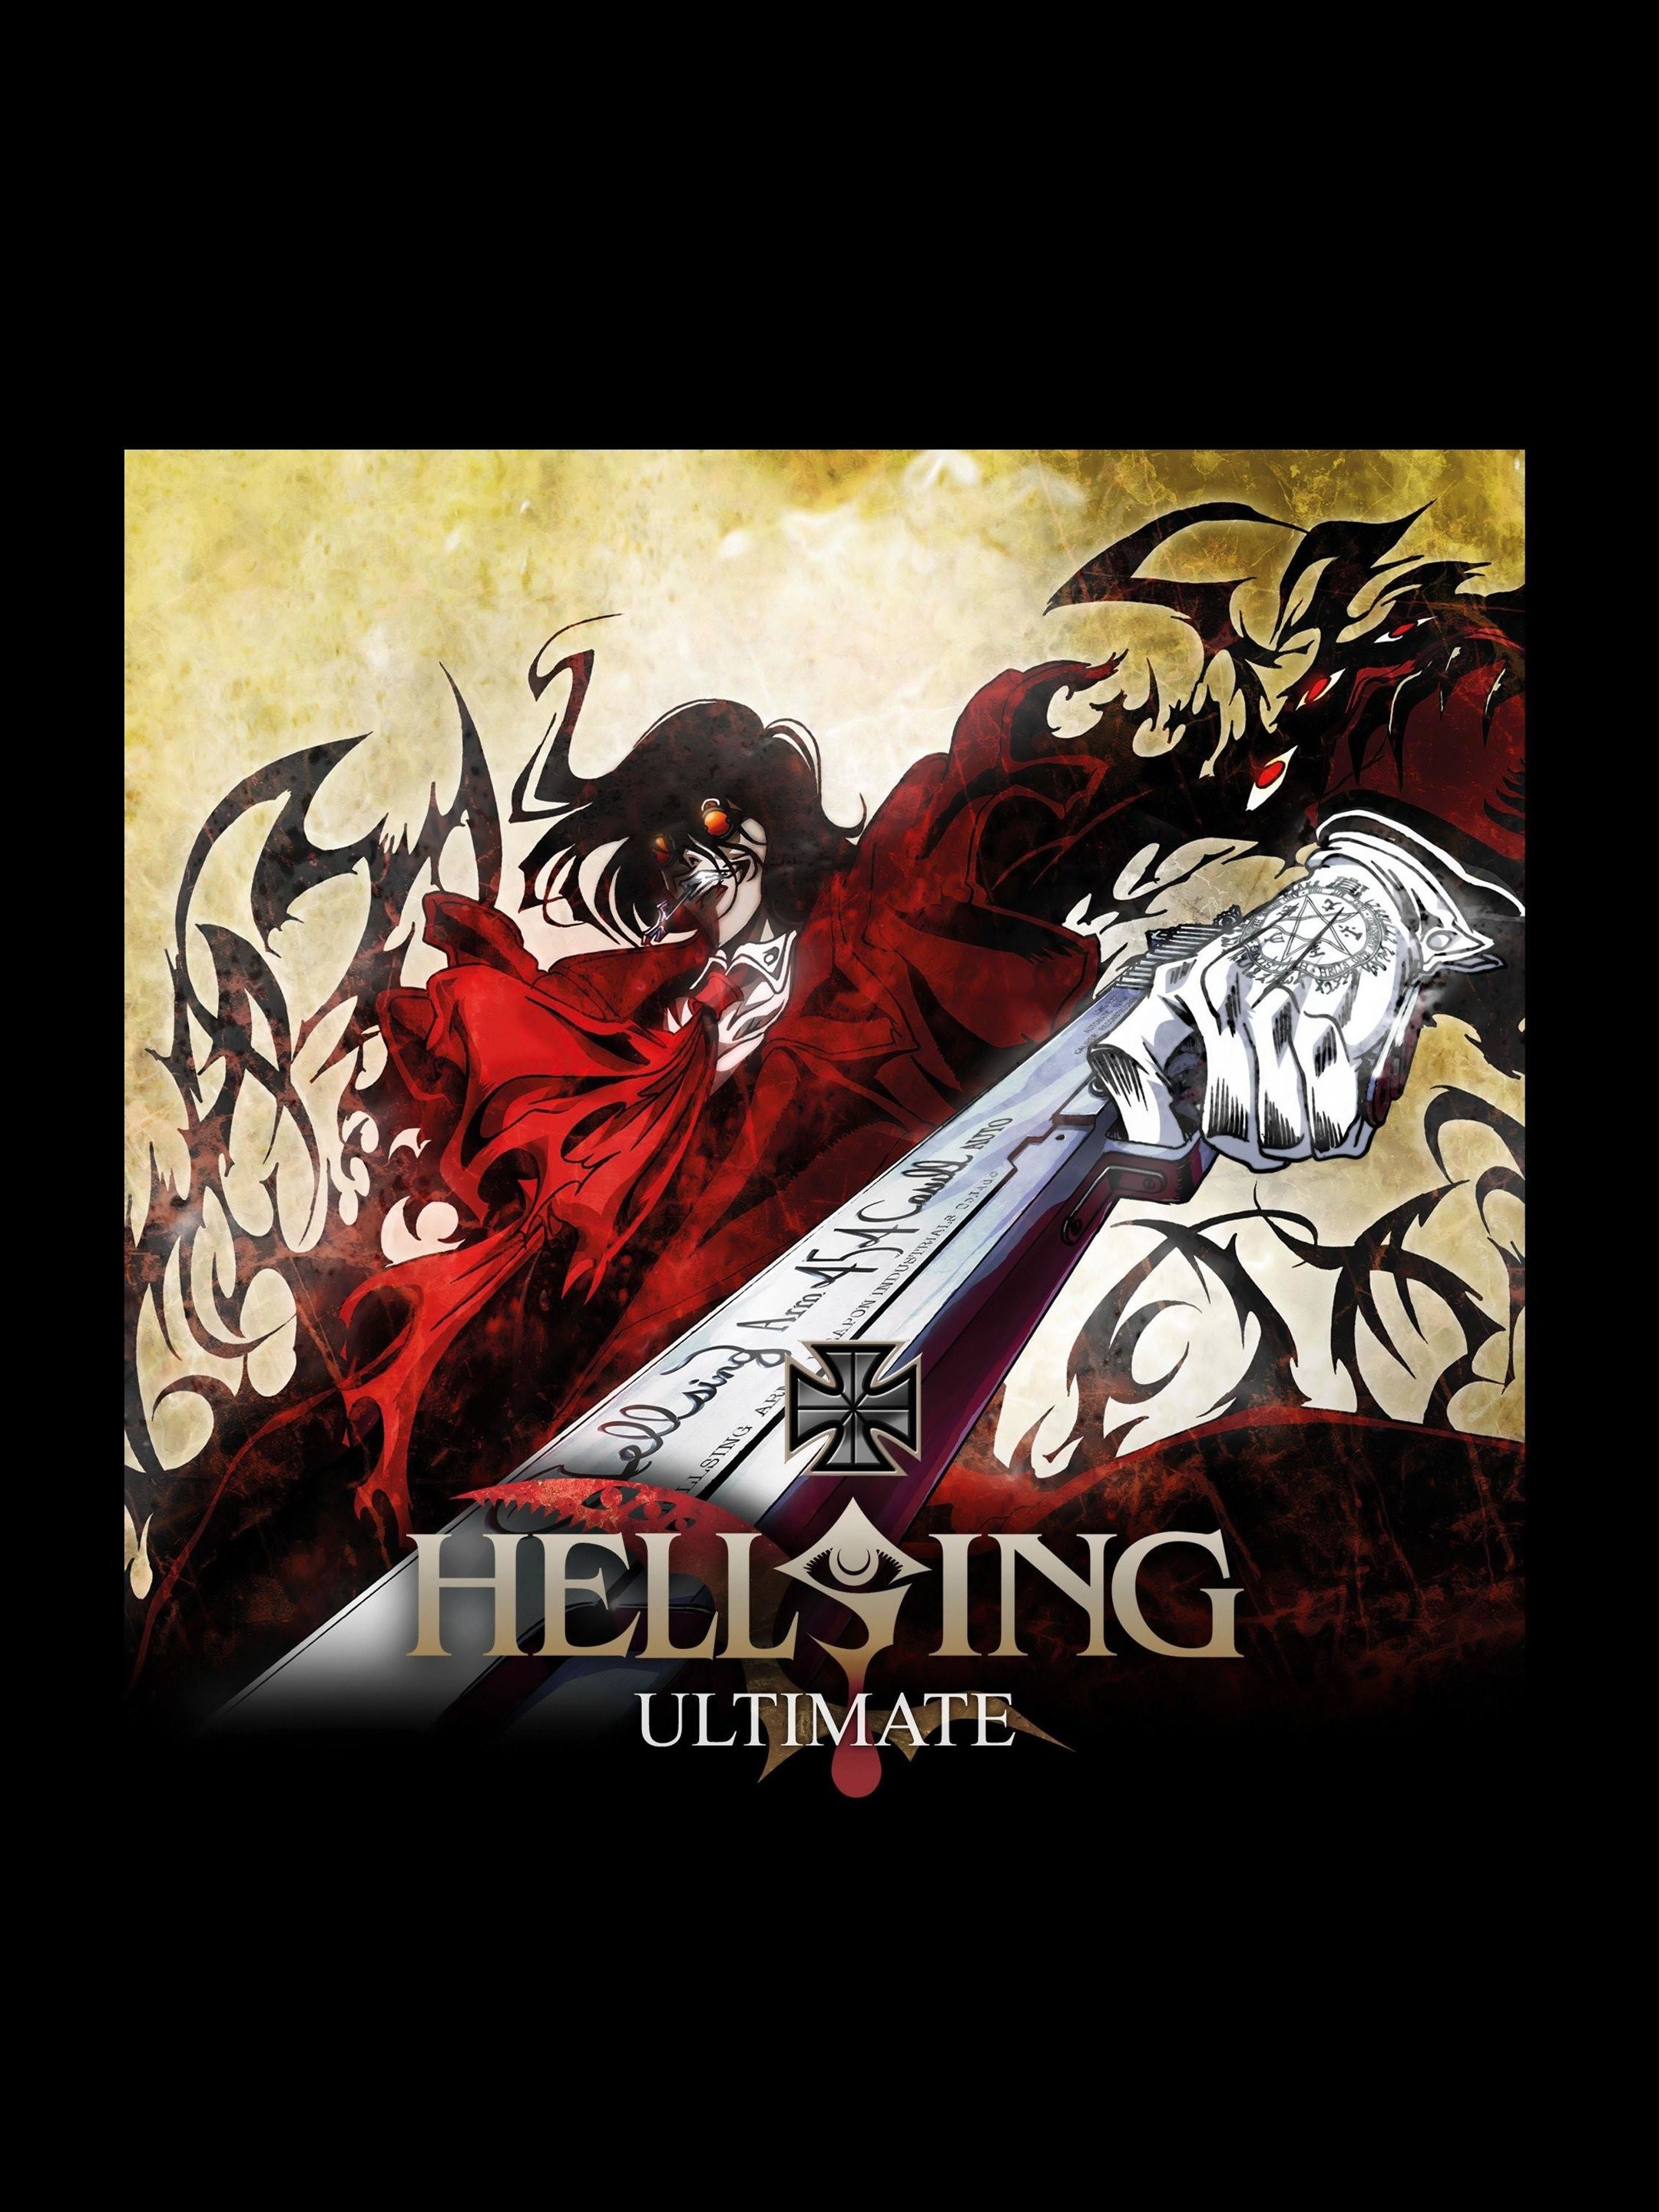 Stream episode W.A.T.C.H Hellsing Ultimate SxE FullEps by Bw93jtiwnshw  podcast | Listen online for free on SoundCloud